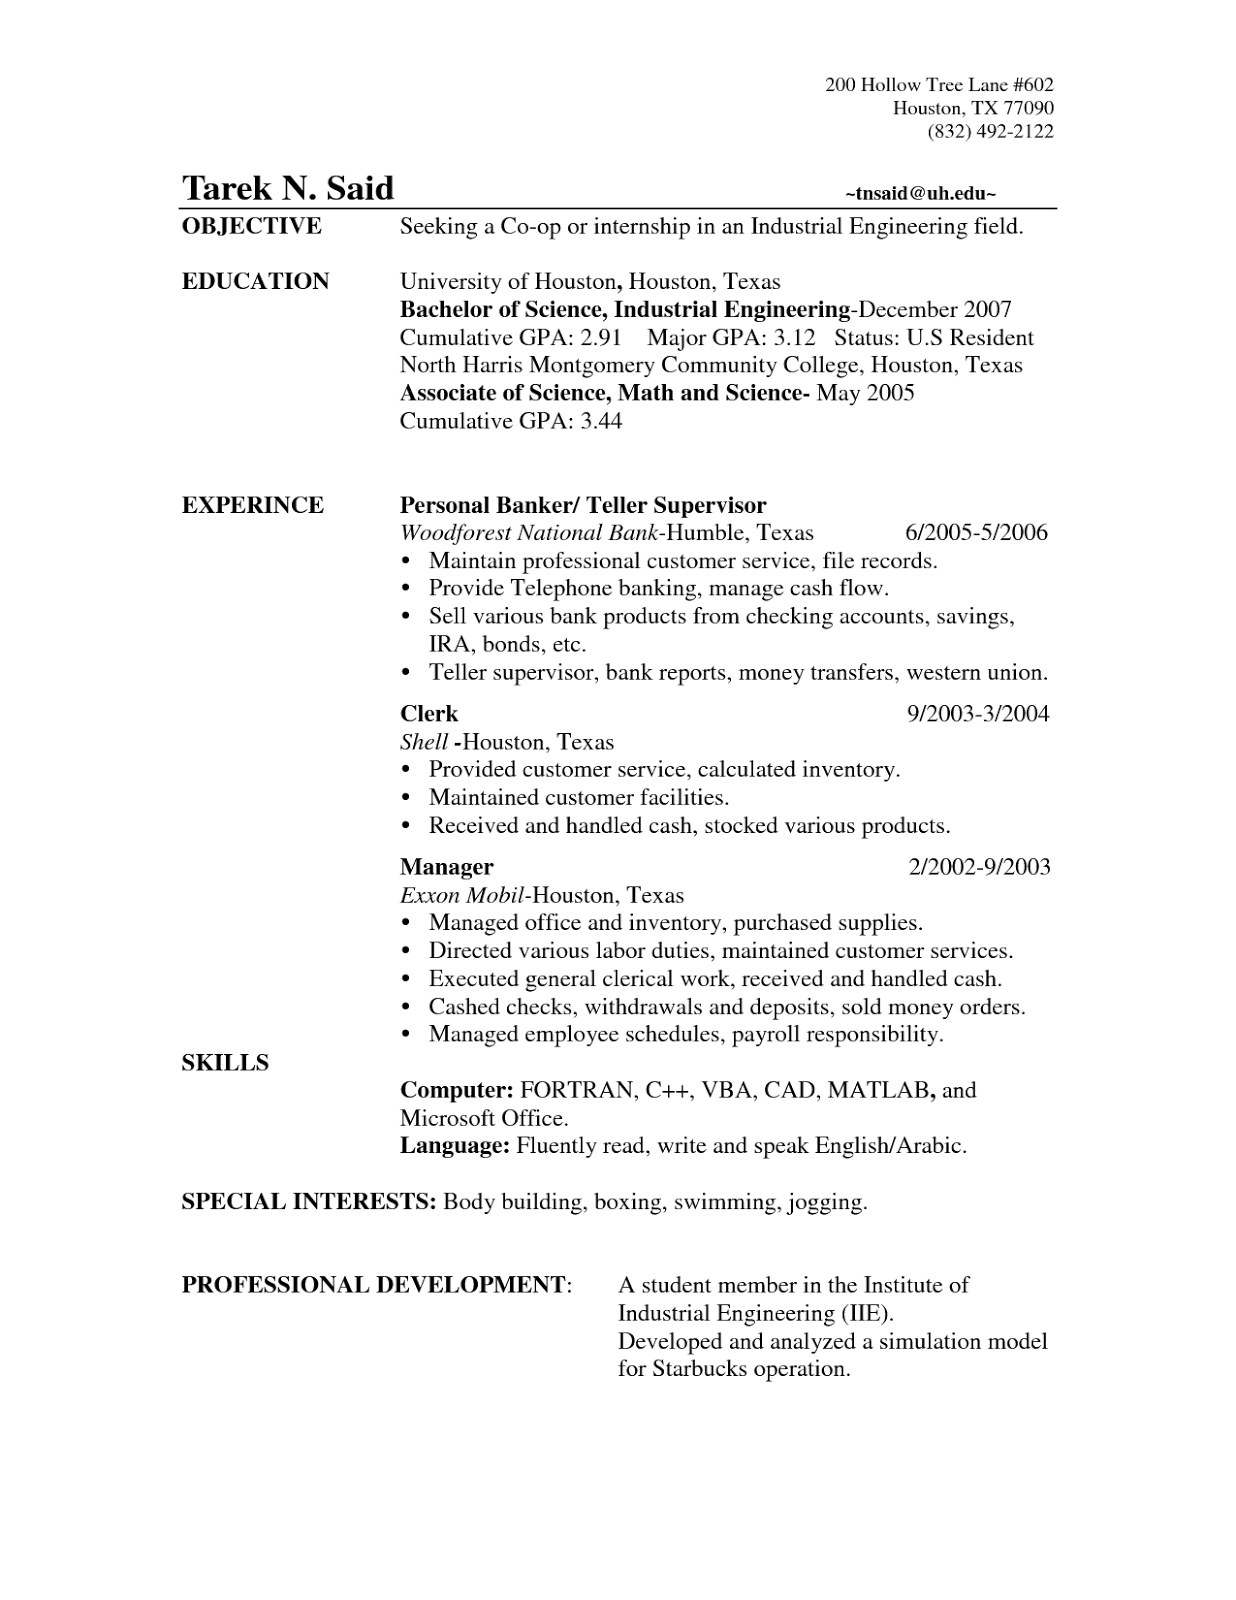 Sample clerical resume objectives